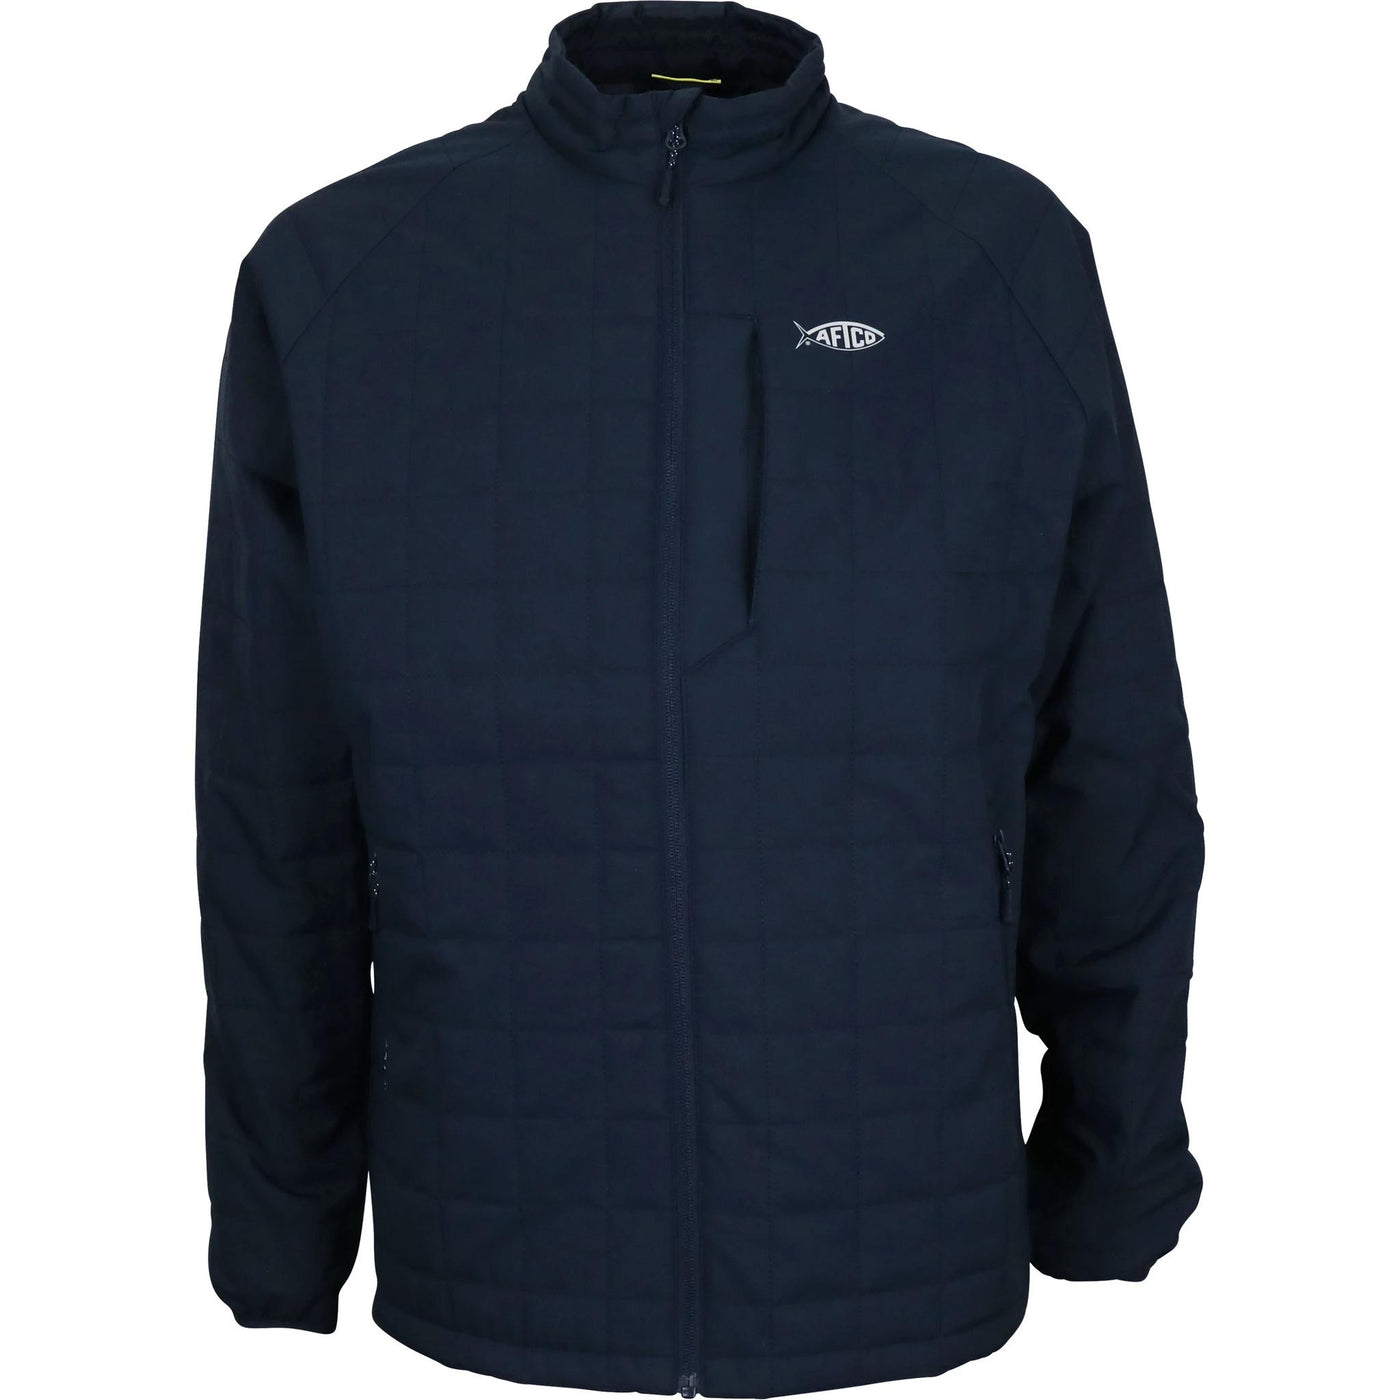 Aftco Pufferfish 300 Jacket-MENS CLOTHING-Kevin's Fine Outdoor Gear & Apparel